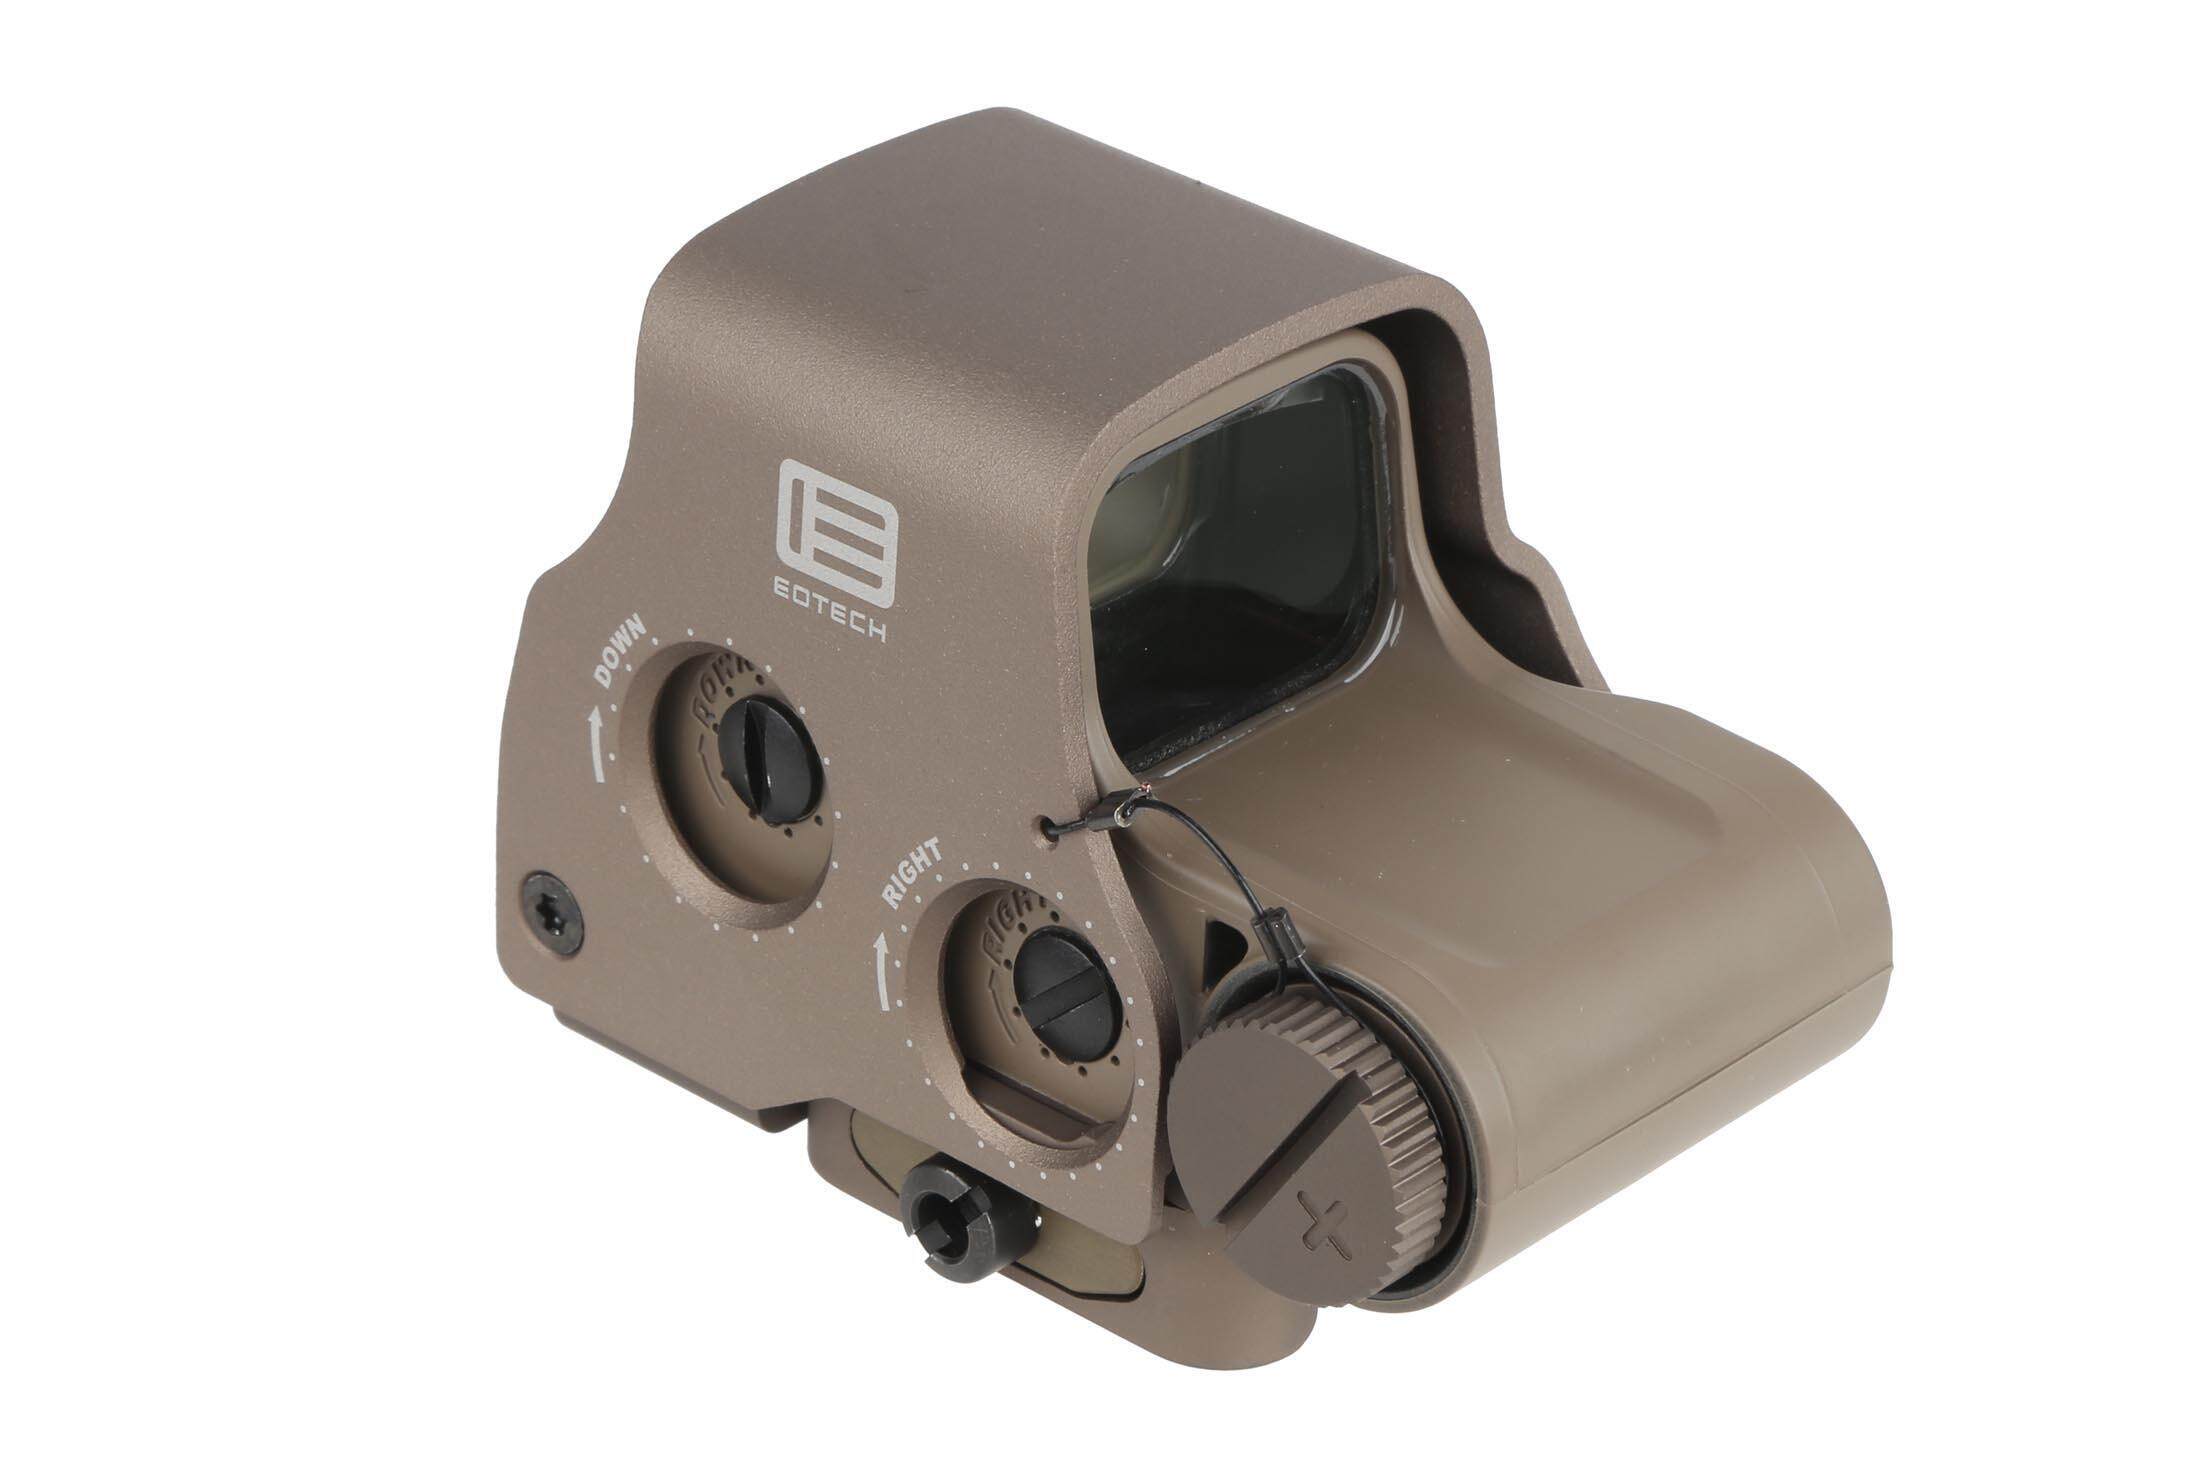 EOTECH EXPS3-0 Holographic Weapon Sight - Tan